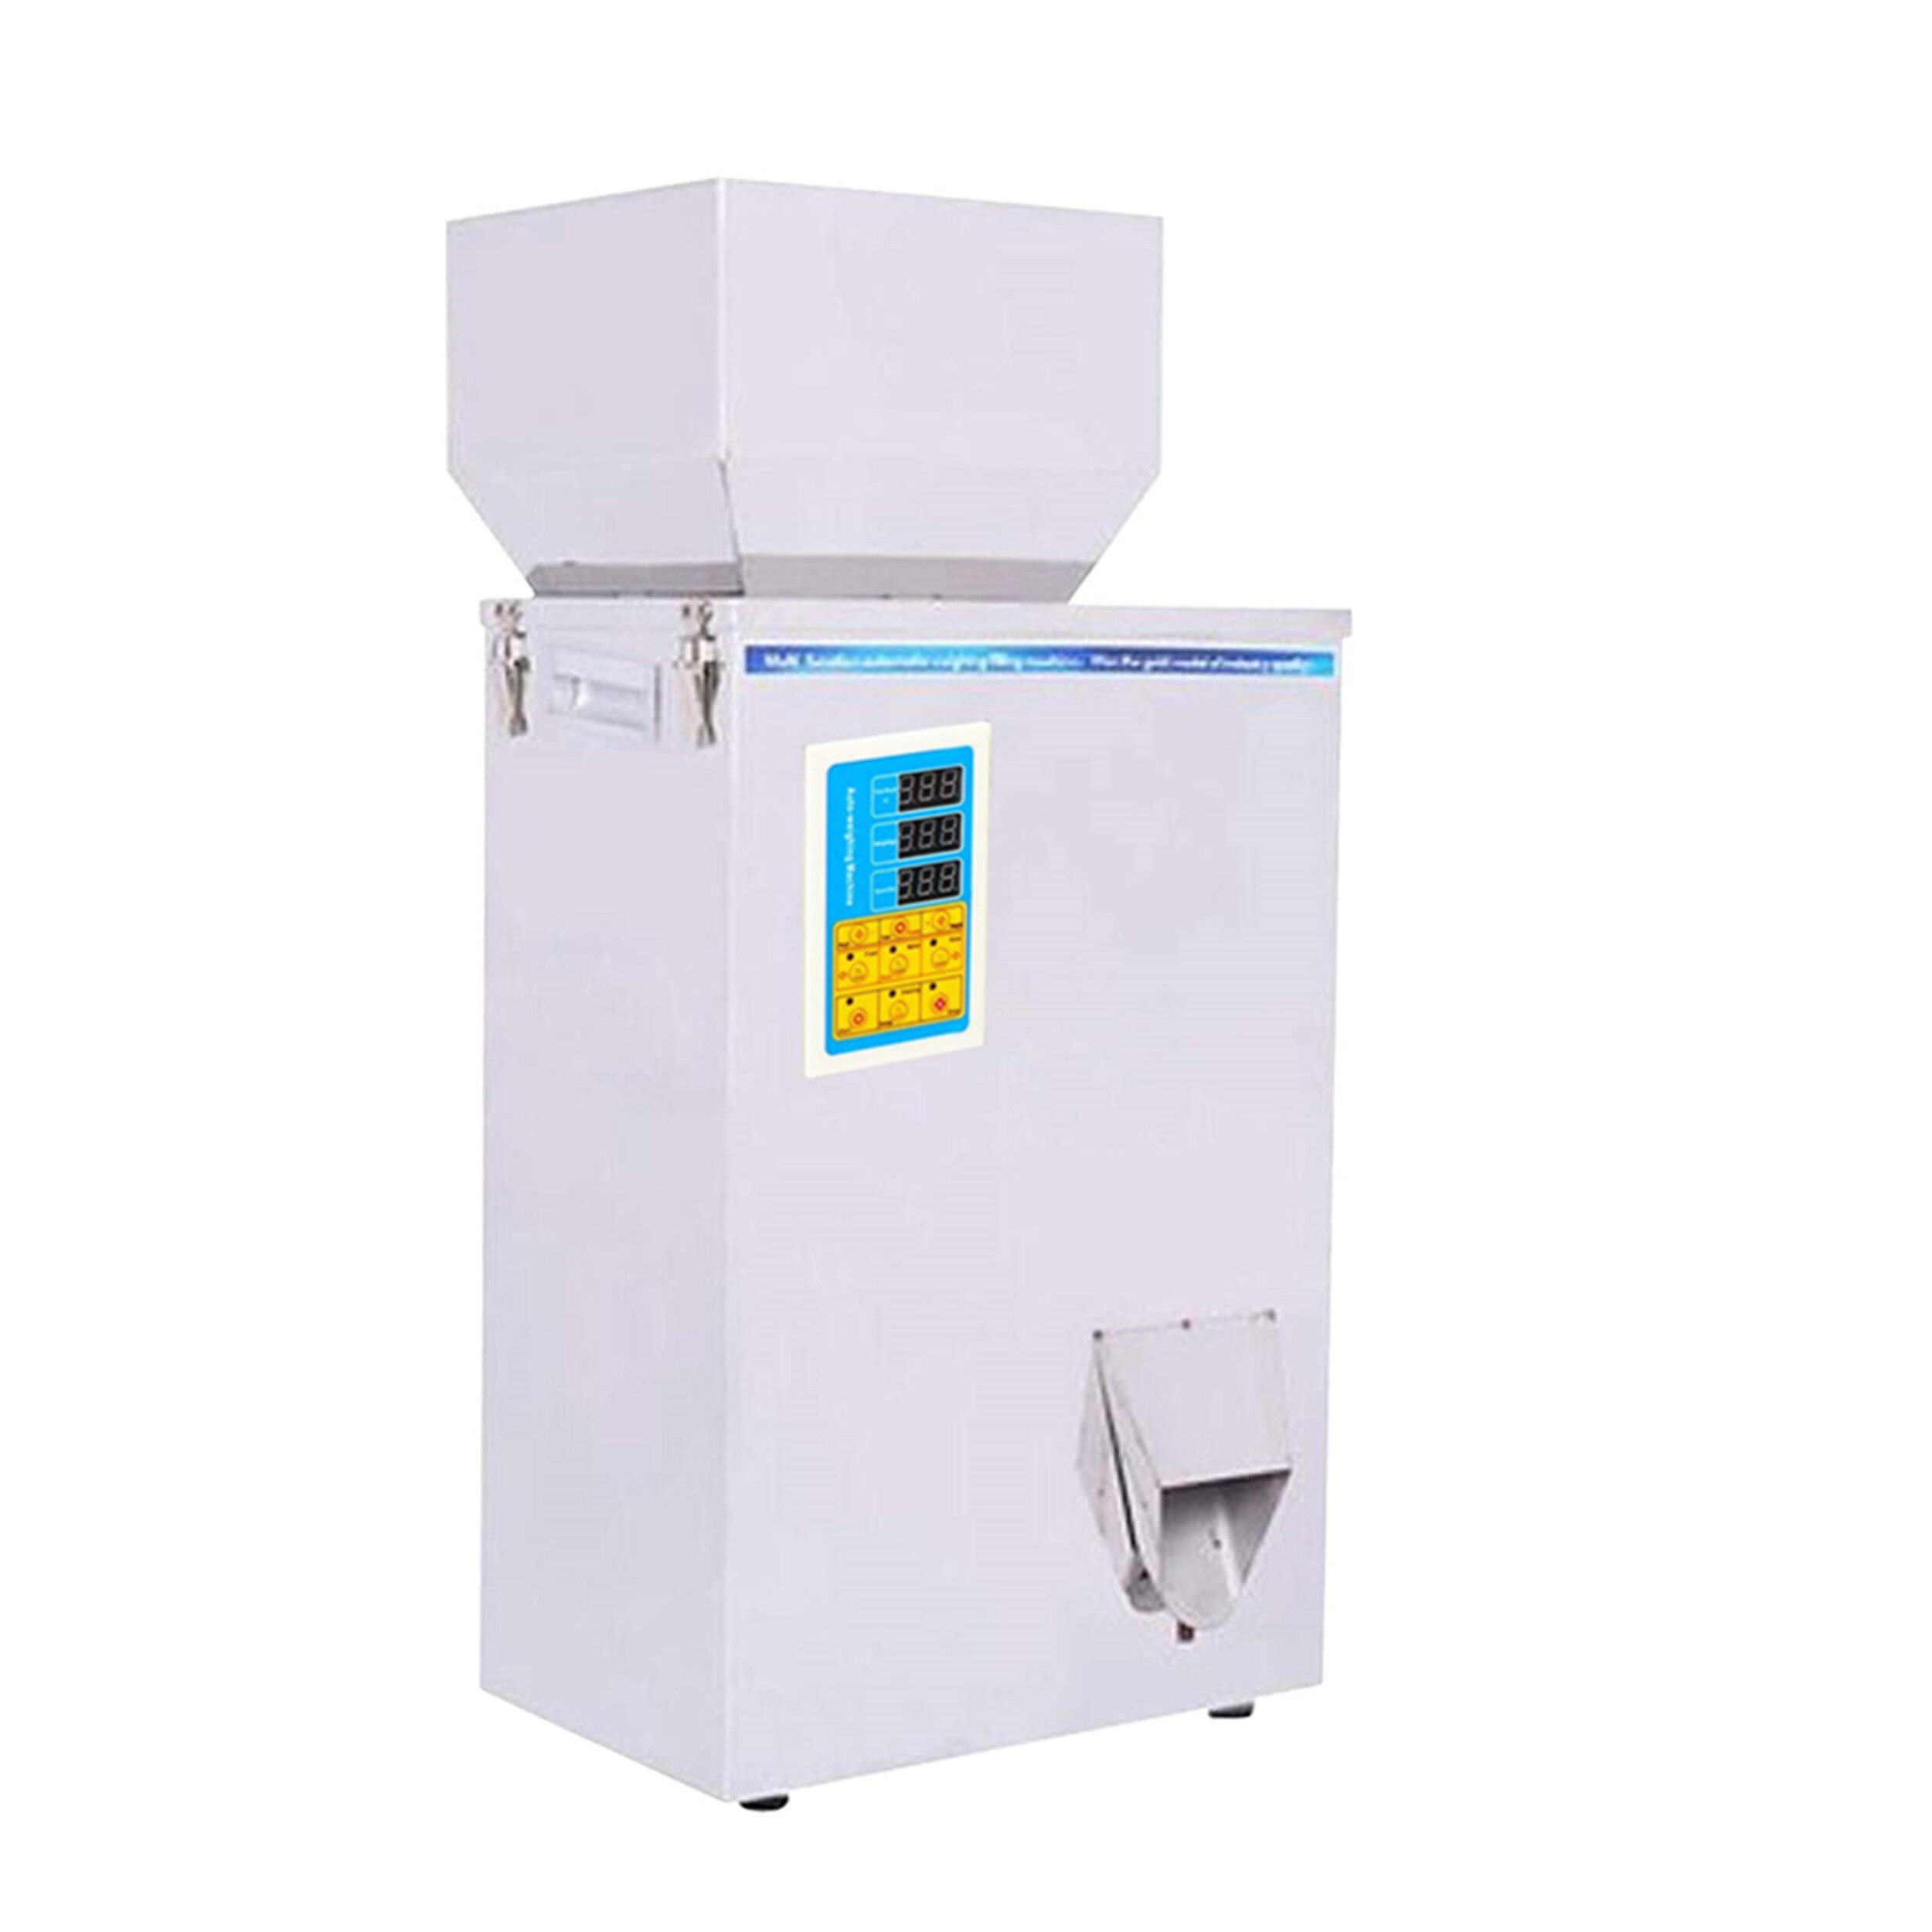 OUKANING 10-500g Powder Dispenser Weighing  Filling Machine for  Cereal/Grains Wayfair Canada